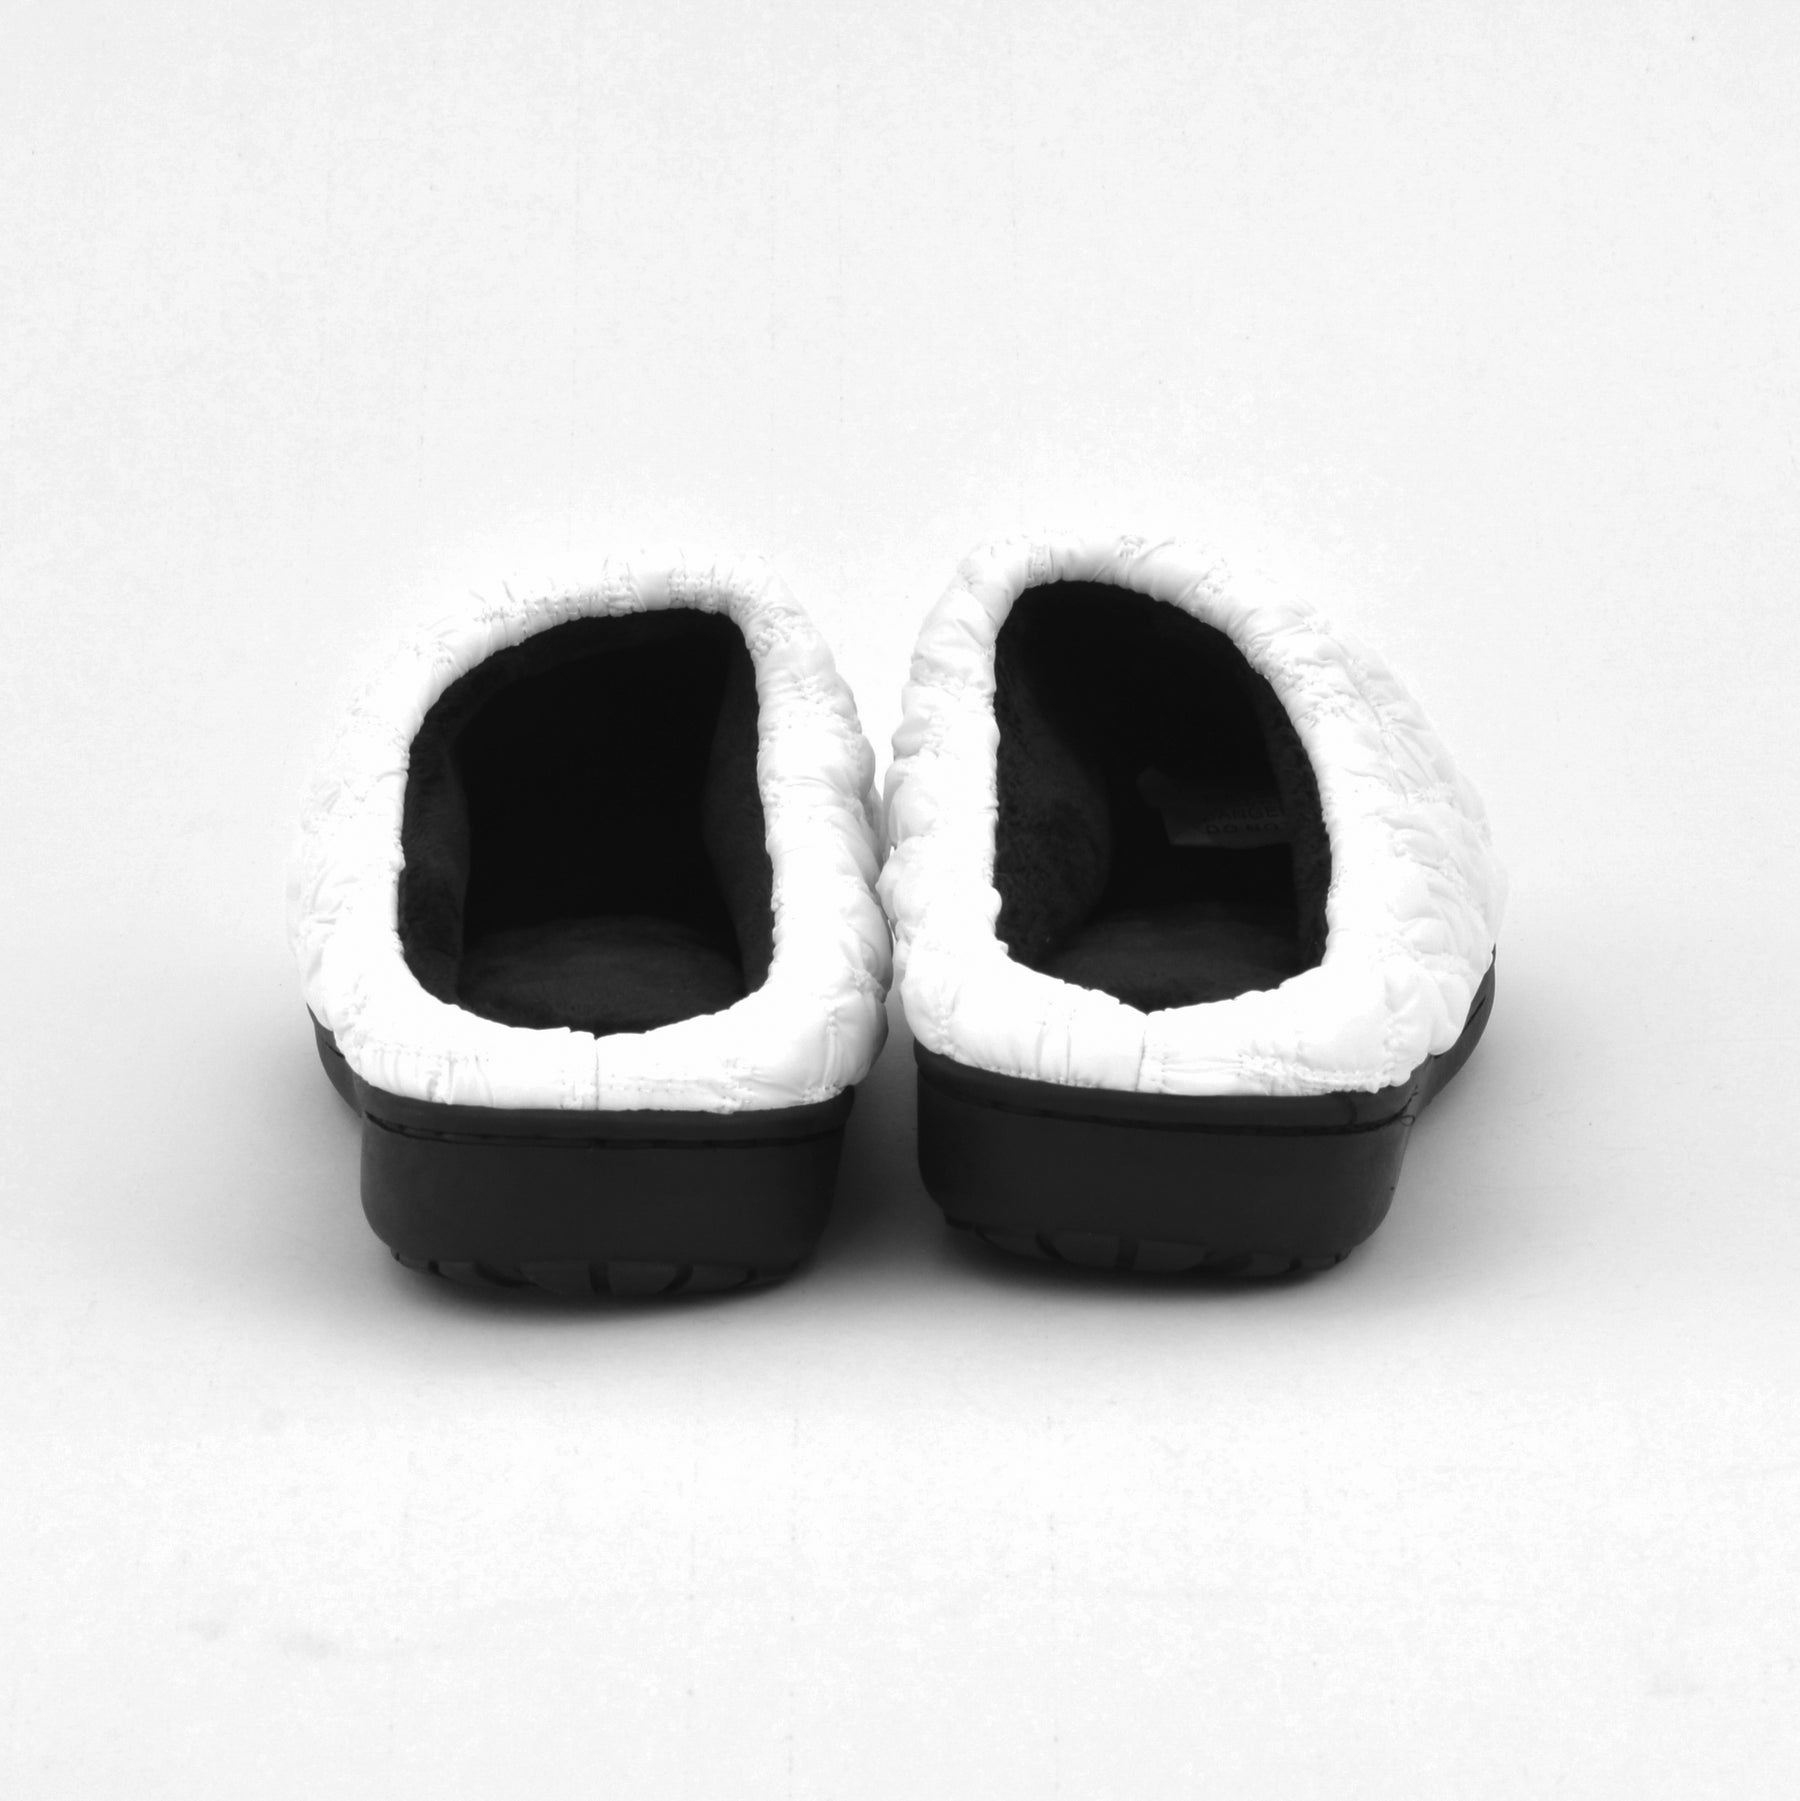 SUBU, Fall & Winter Concept Slippers Bumpy White, Slippers,